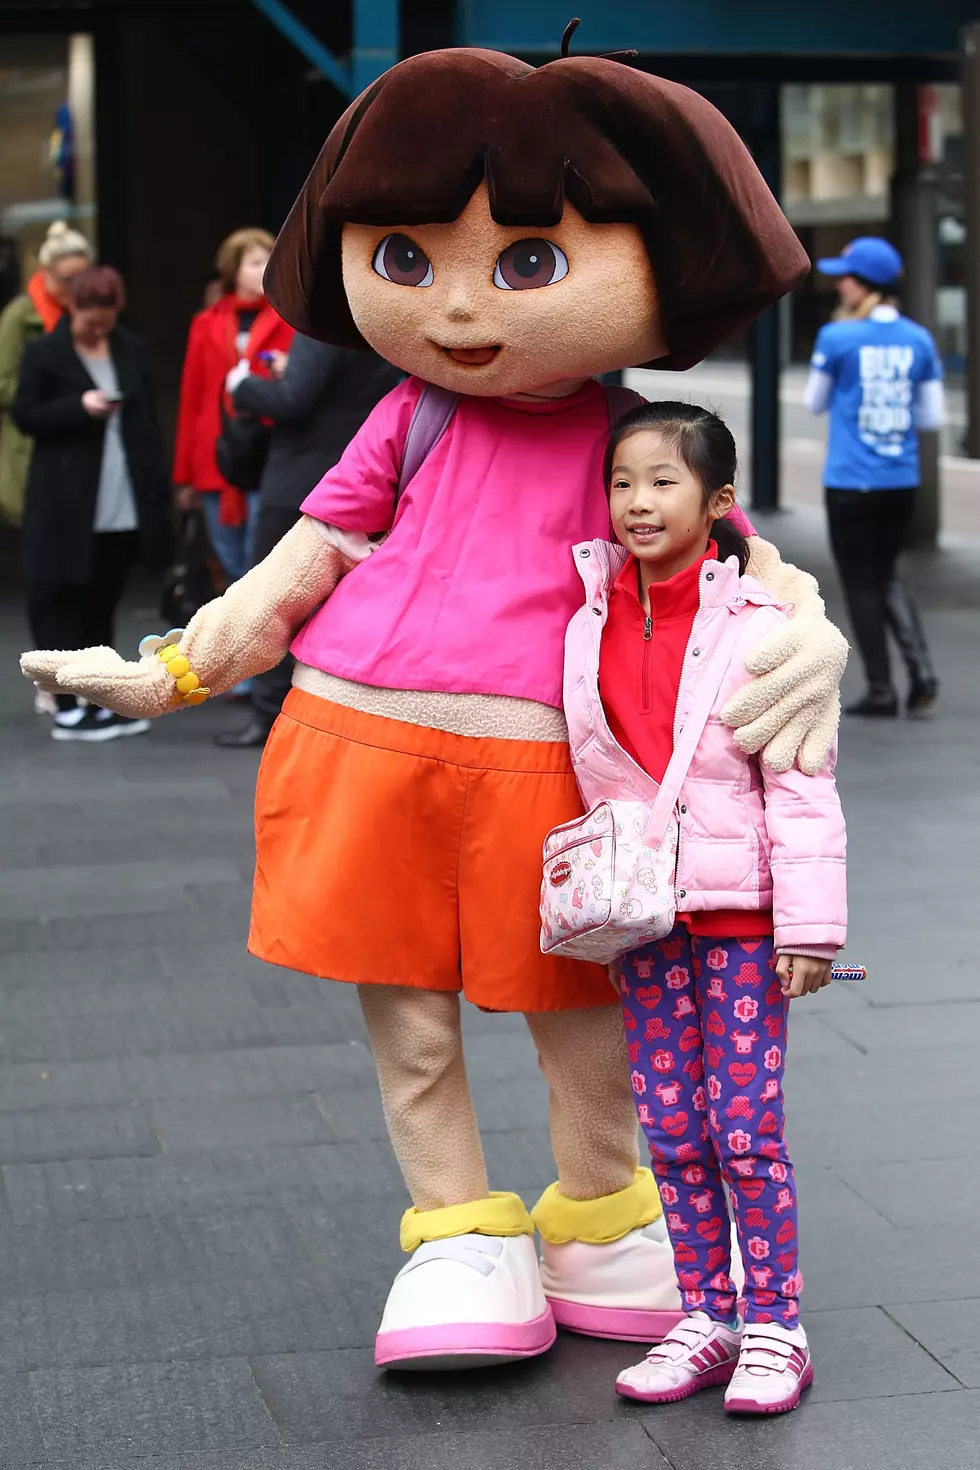 Is “Dora the Explorer” Coming to the Big Screen?